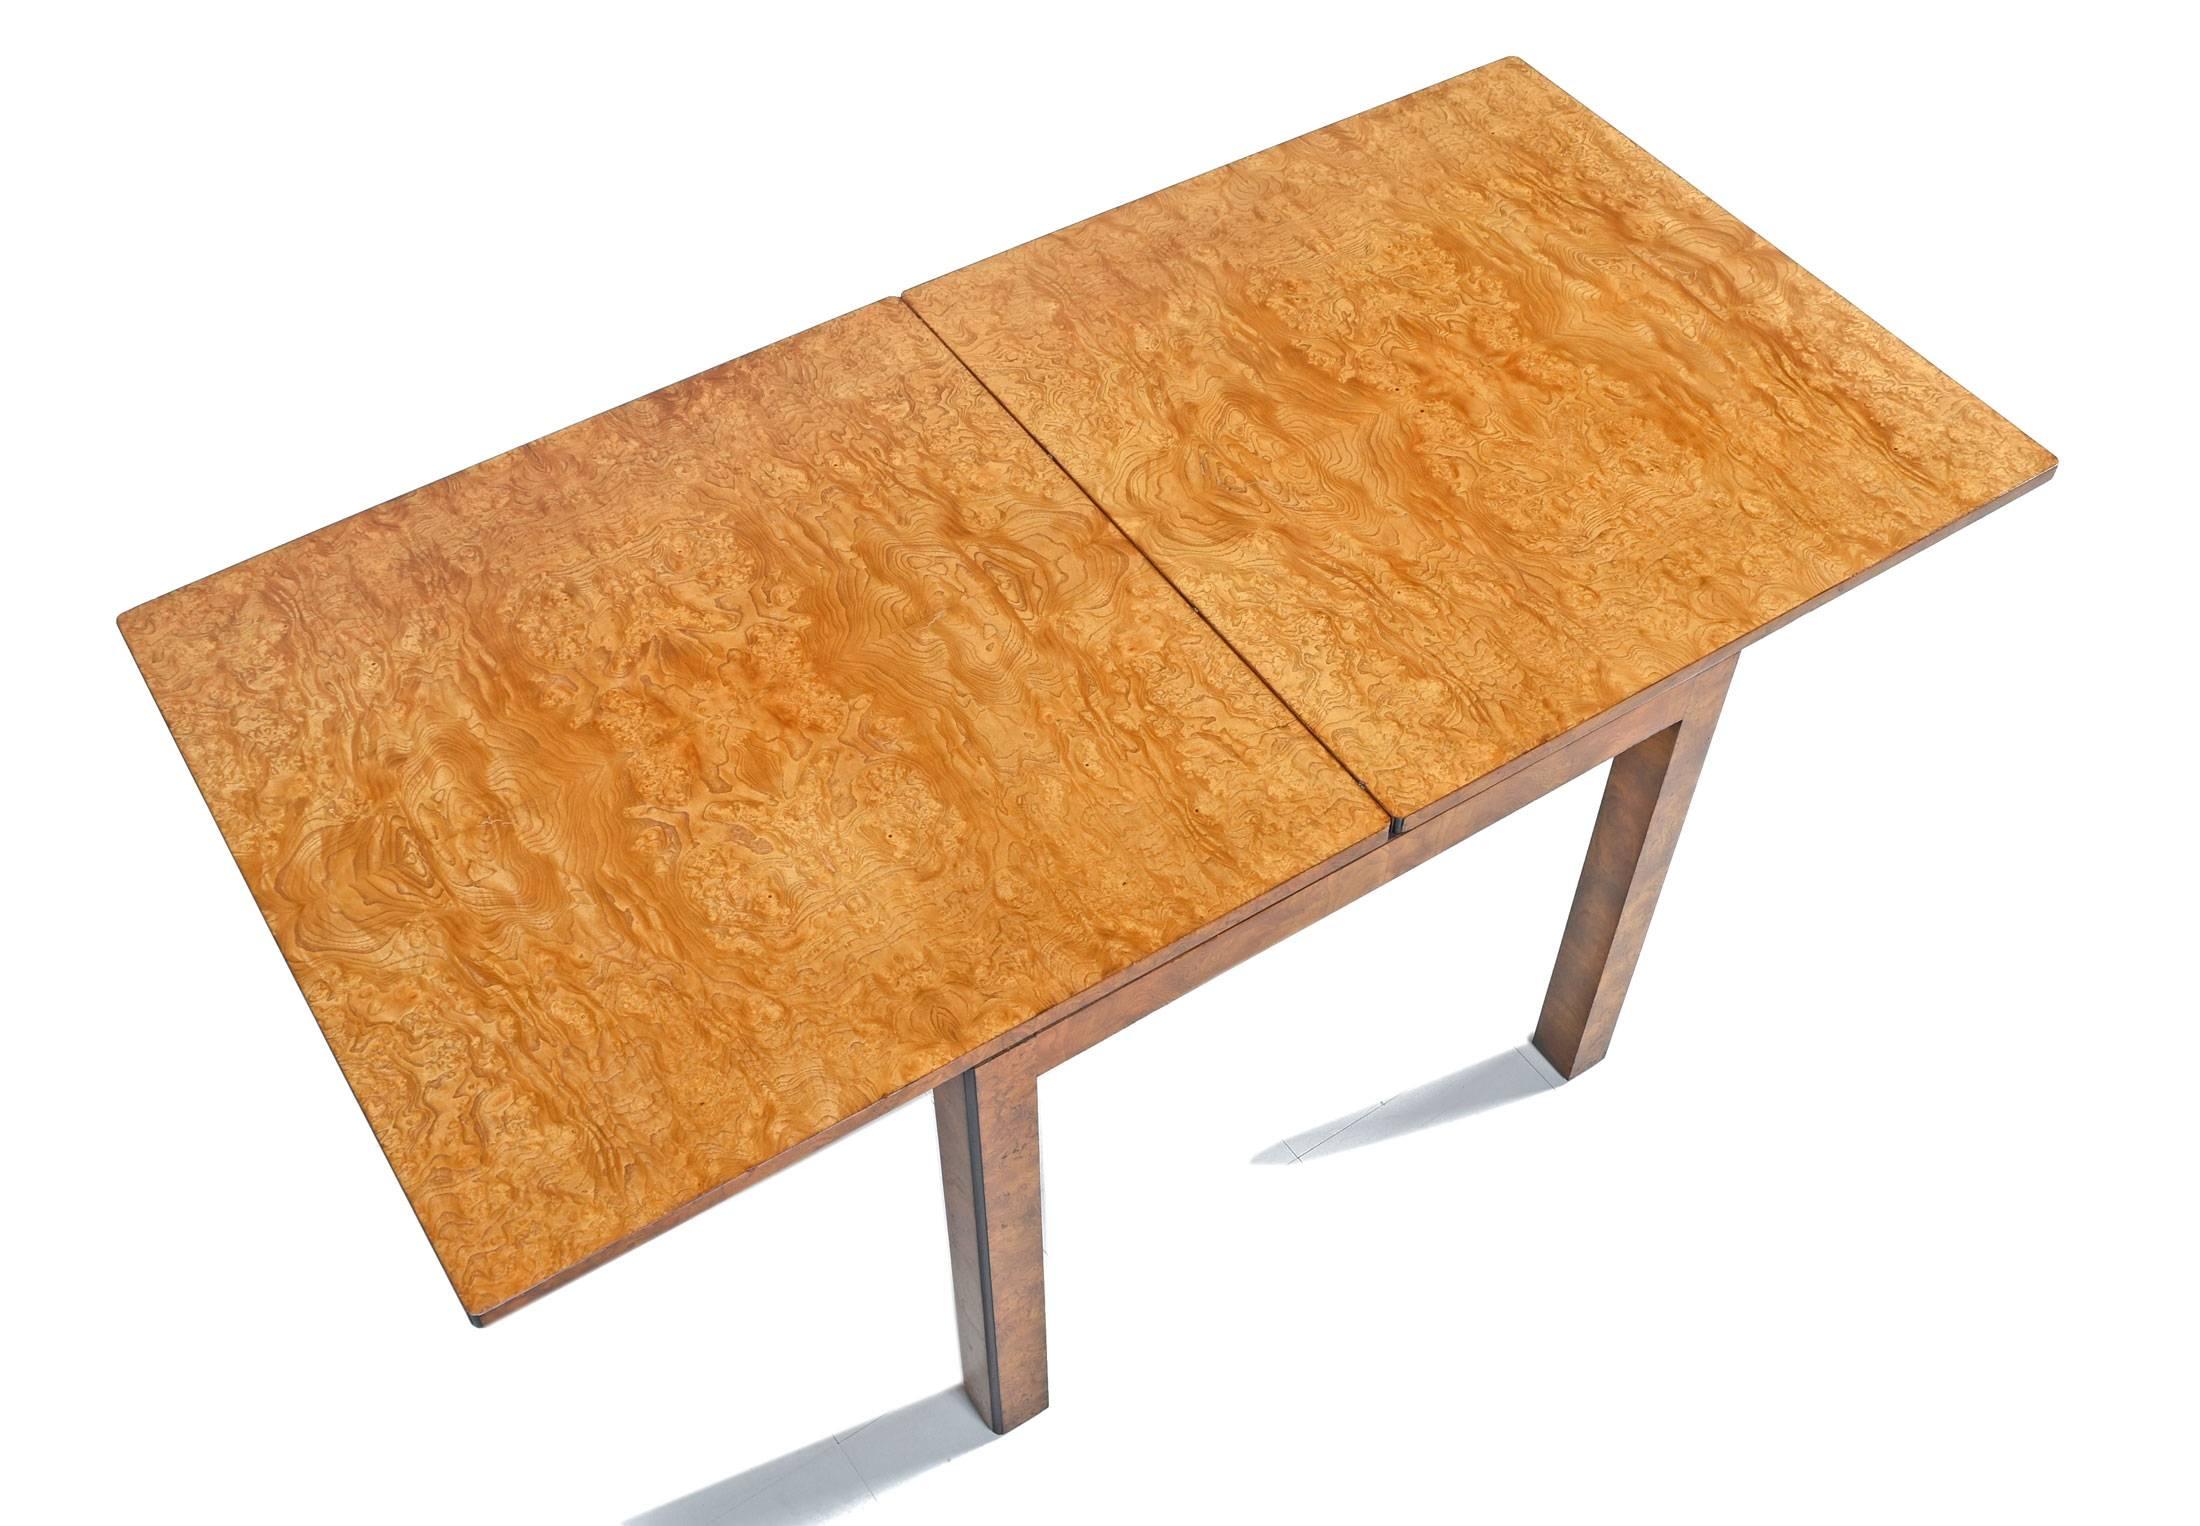 Stunning extendable Parsons style flip-flop dining table by John Widdicomb. Made of a gorgeous golden olive burl wood, circa 1970s. Open fully, the double tabletop extends to creates a large rectangle which hangs past the table base and legs. To